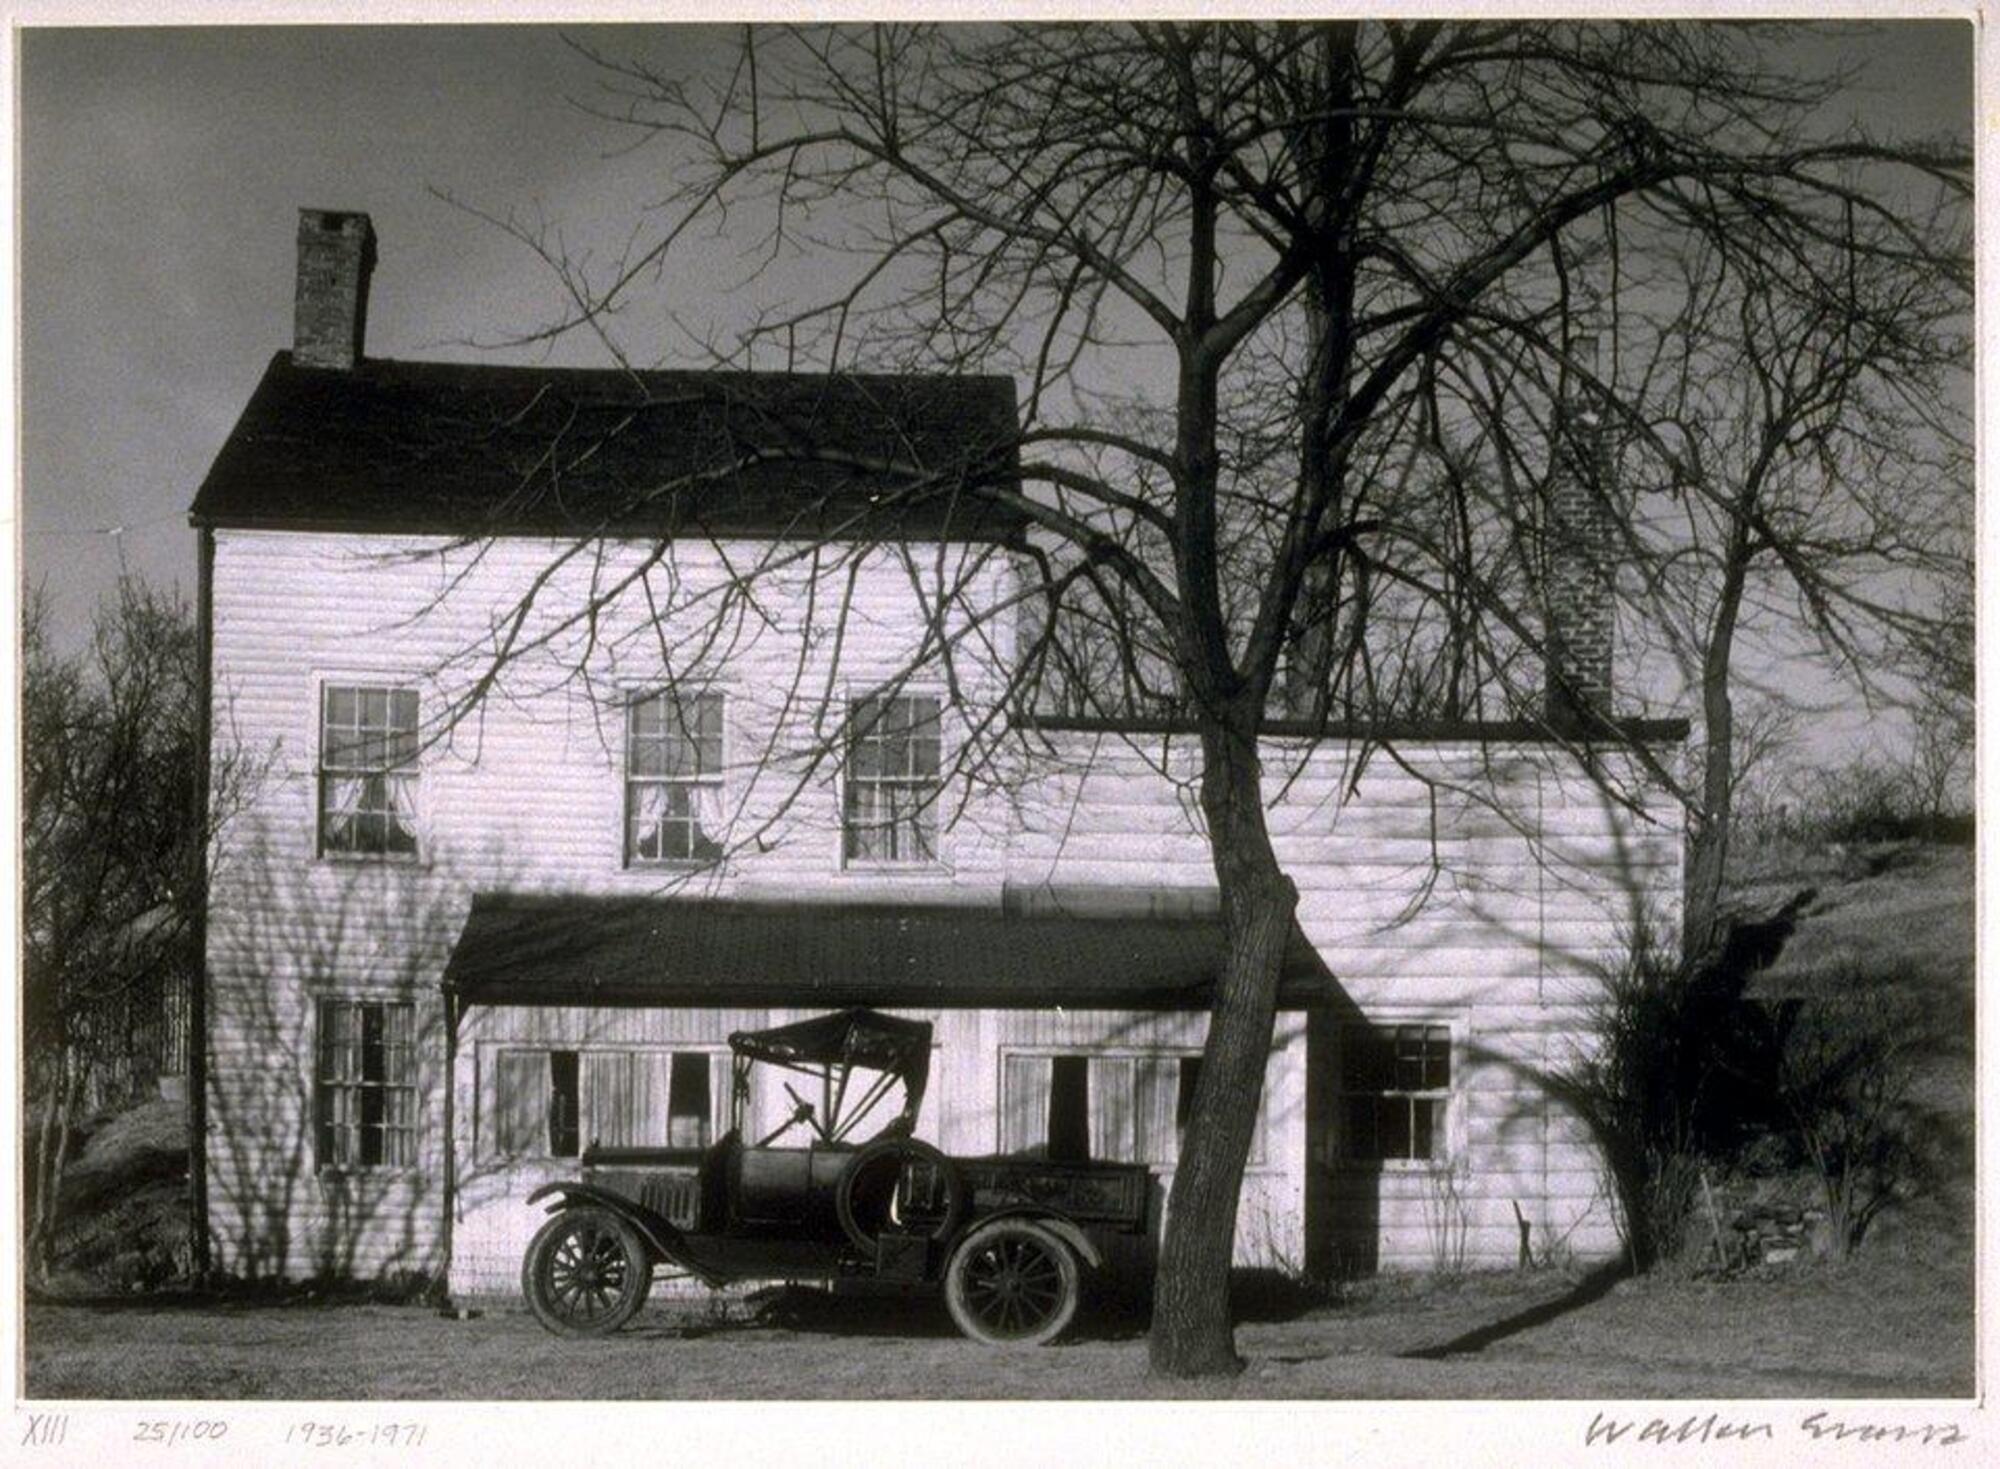 A profile view of a farmhouse featuring a car and a tree without leaves.